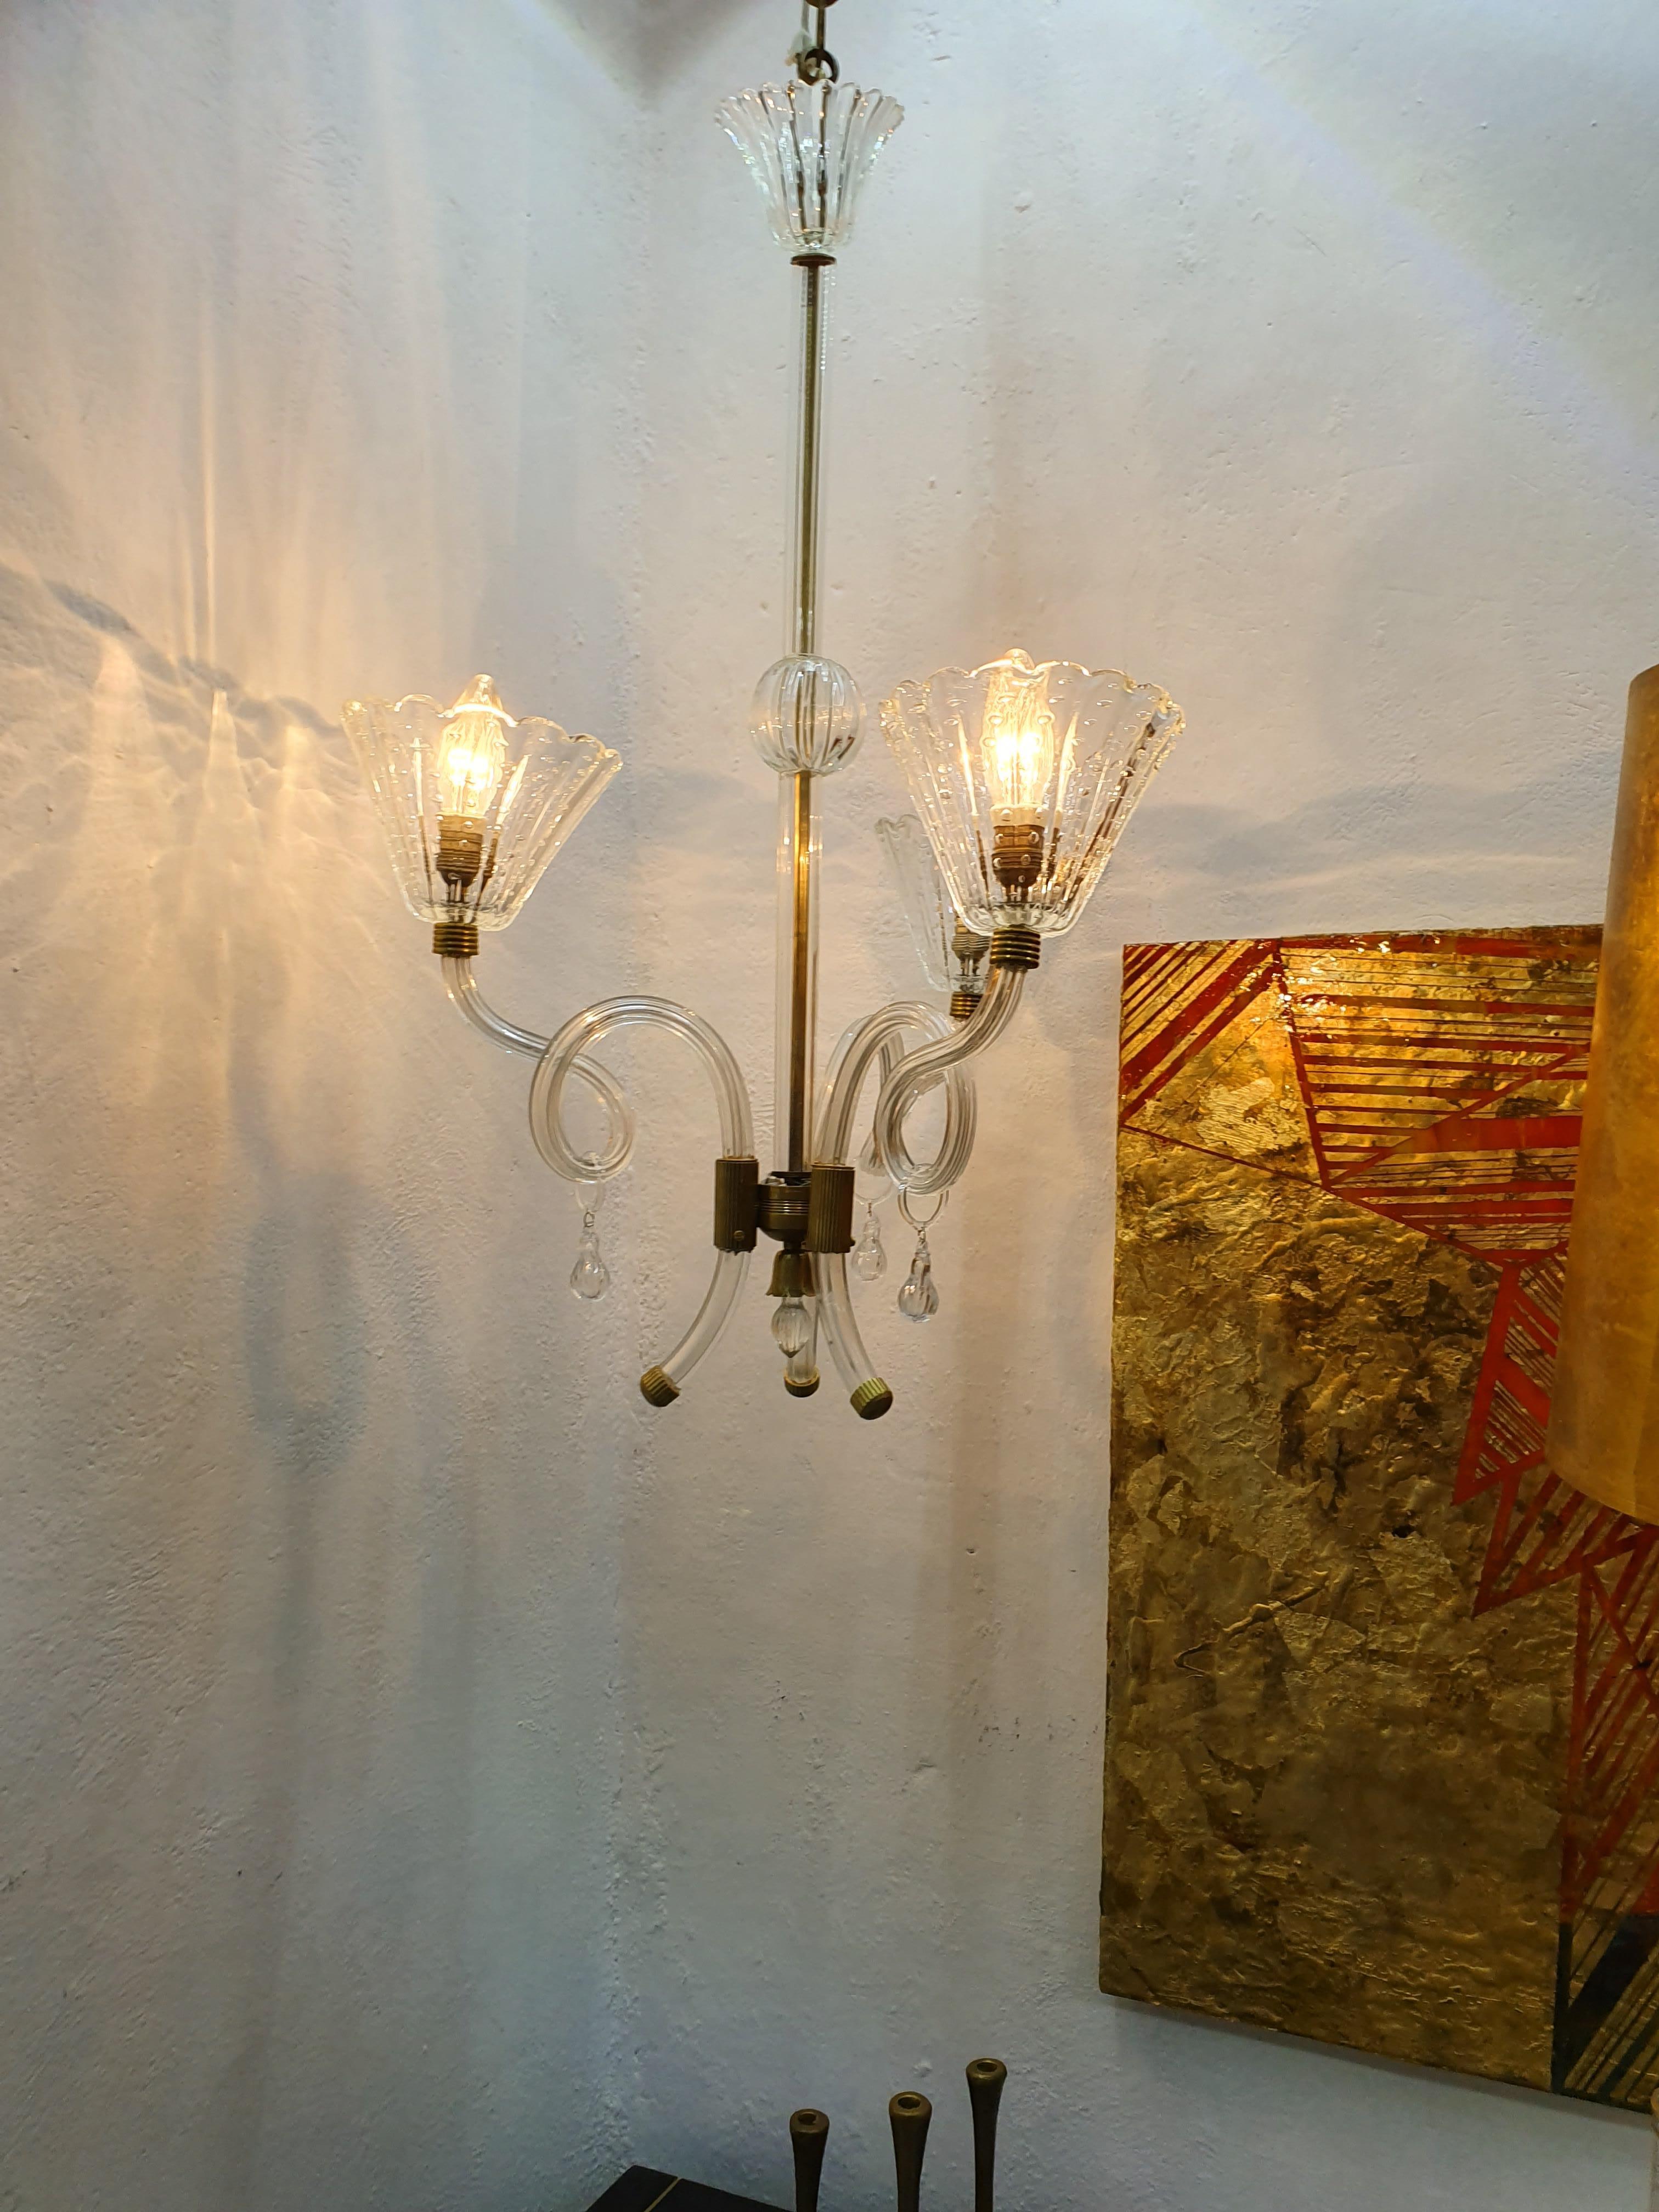 Mid-Century Modern Chandelier by Barovier Toso in Murano Glass, Italy circa 1950 For Sale 5